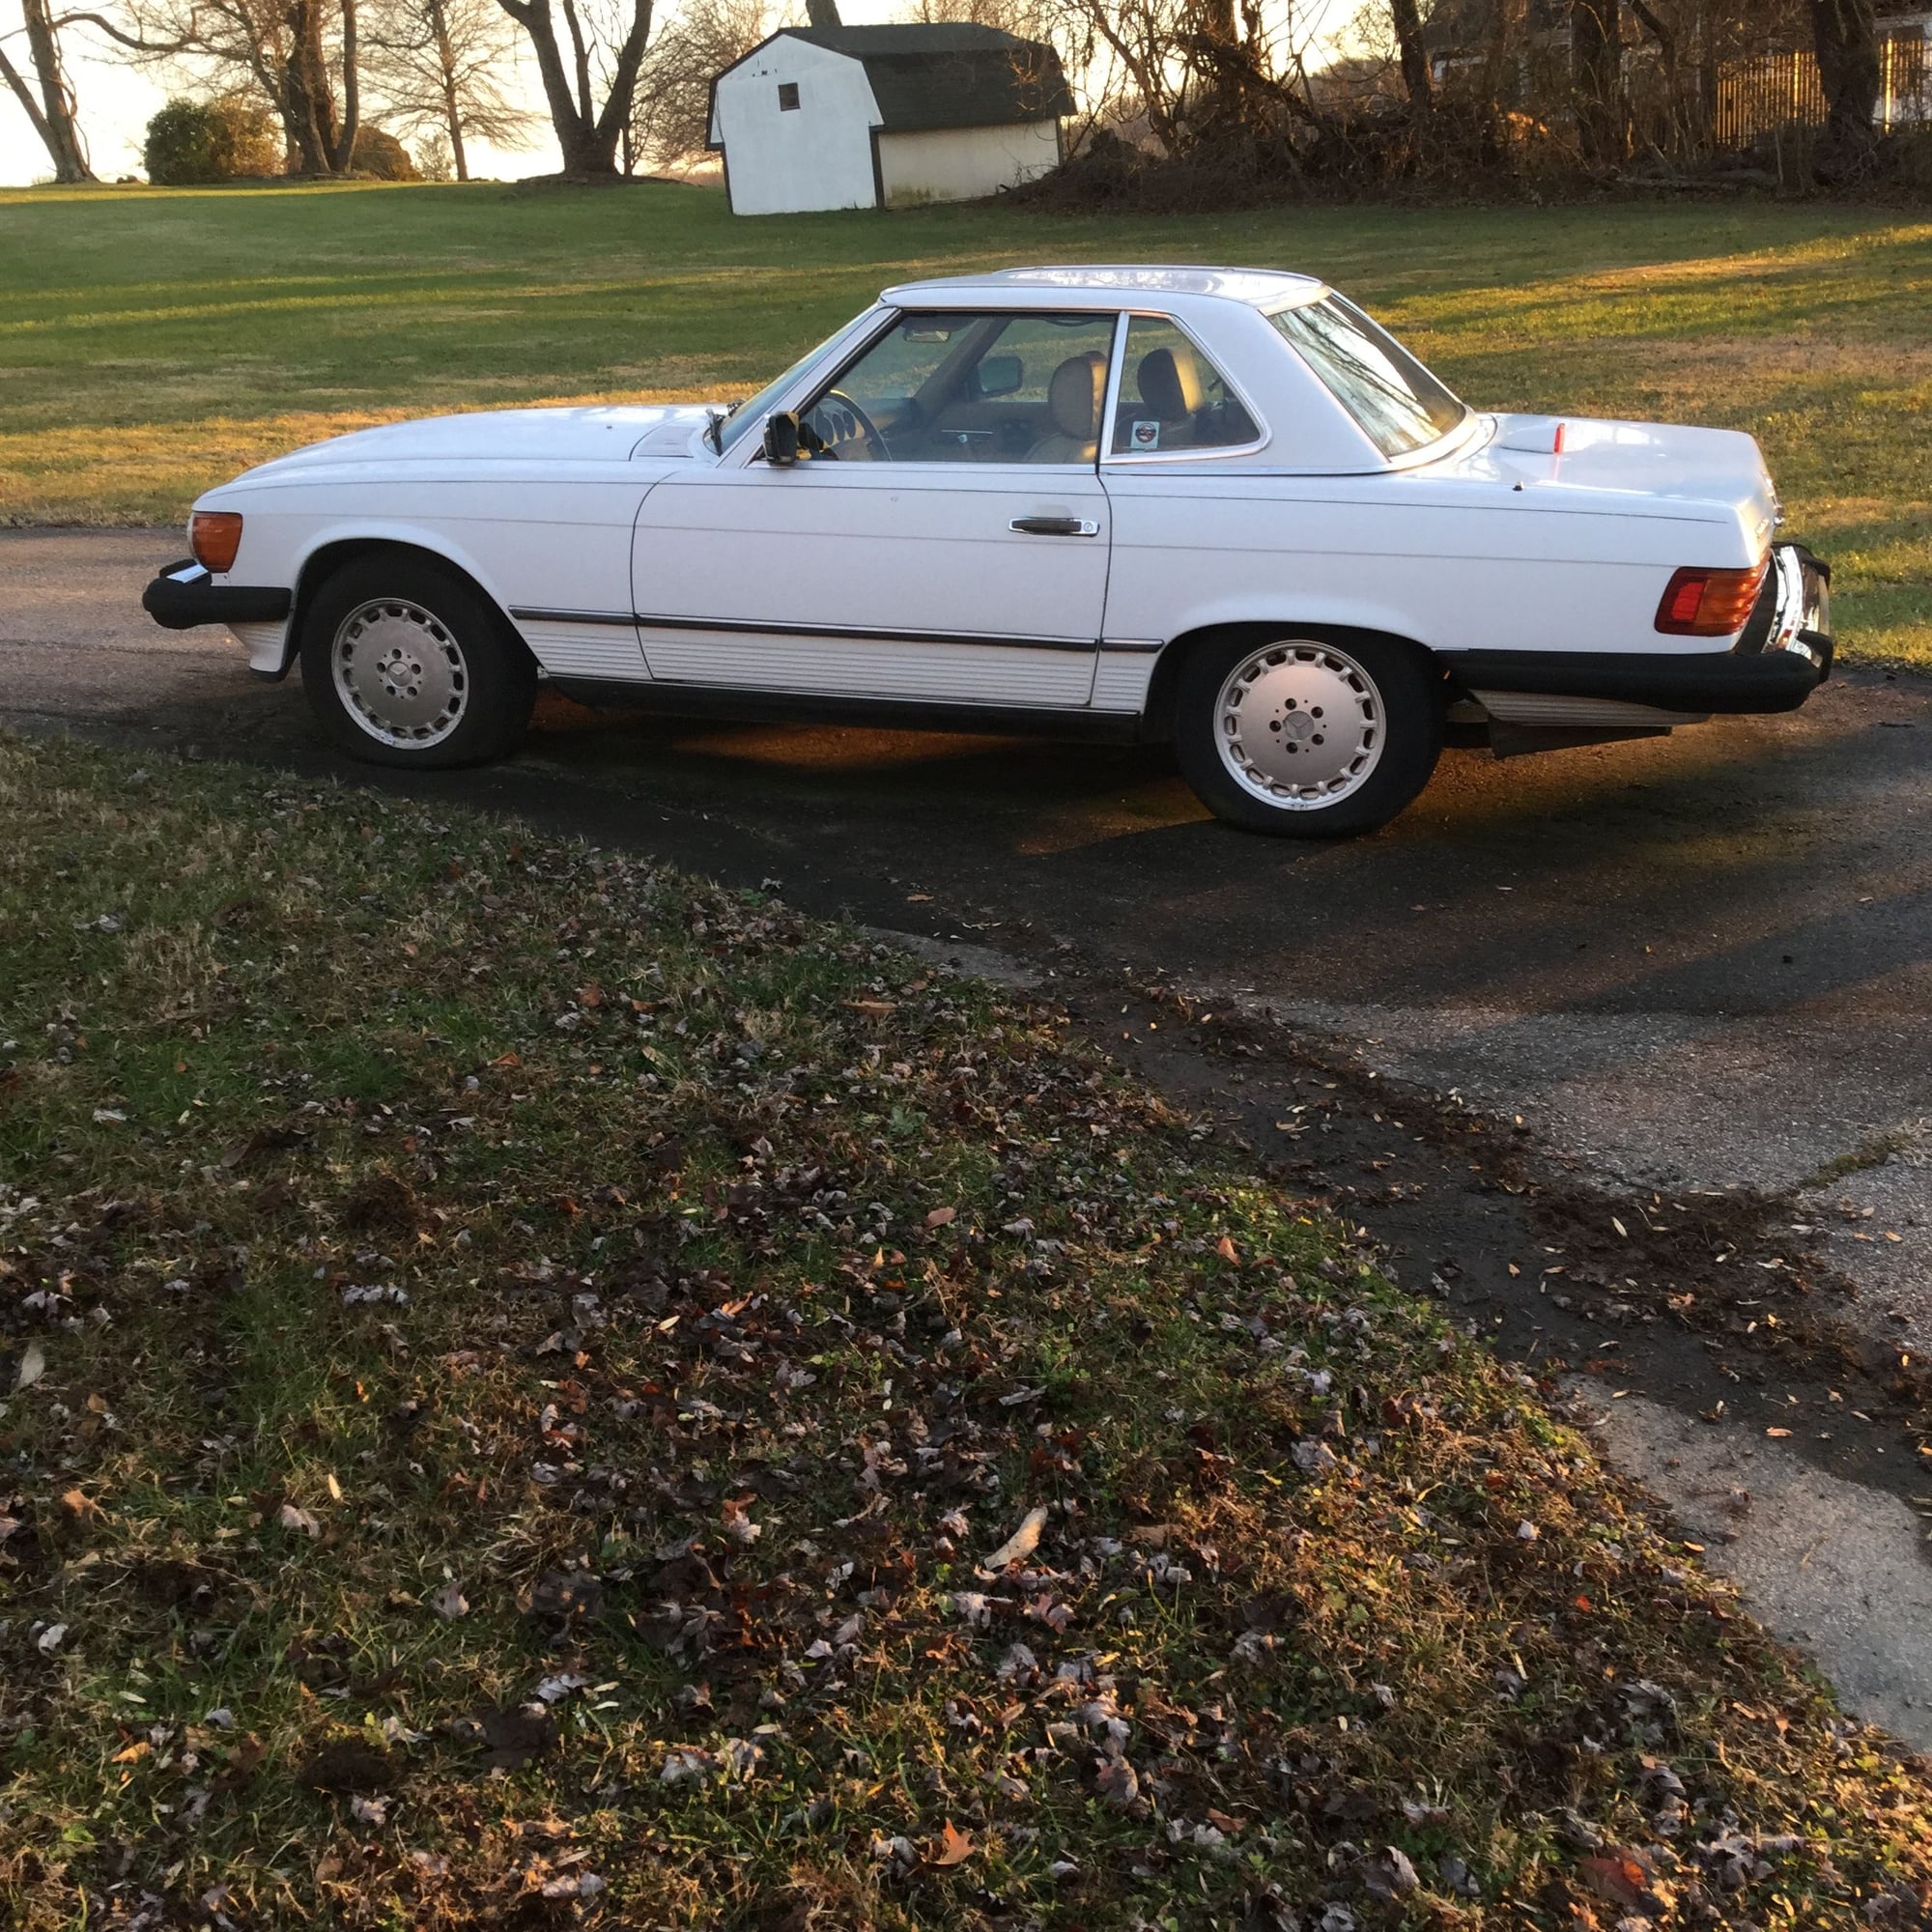 1987 Mercedes-Benz 560SL - Used 87' white 560SL Benz ... ready for immediate sale! - Used - VIN WDBBA48D2HA072553 - 98,957 Miles - 6 cyl - 2WD - Automatic - Convertible - White - Upper  Marlboro, MD 20772, United States